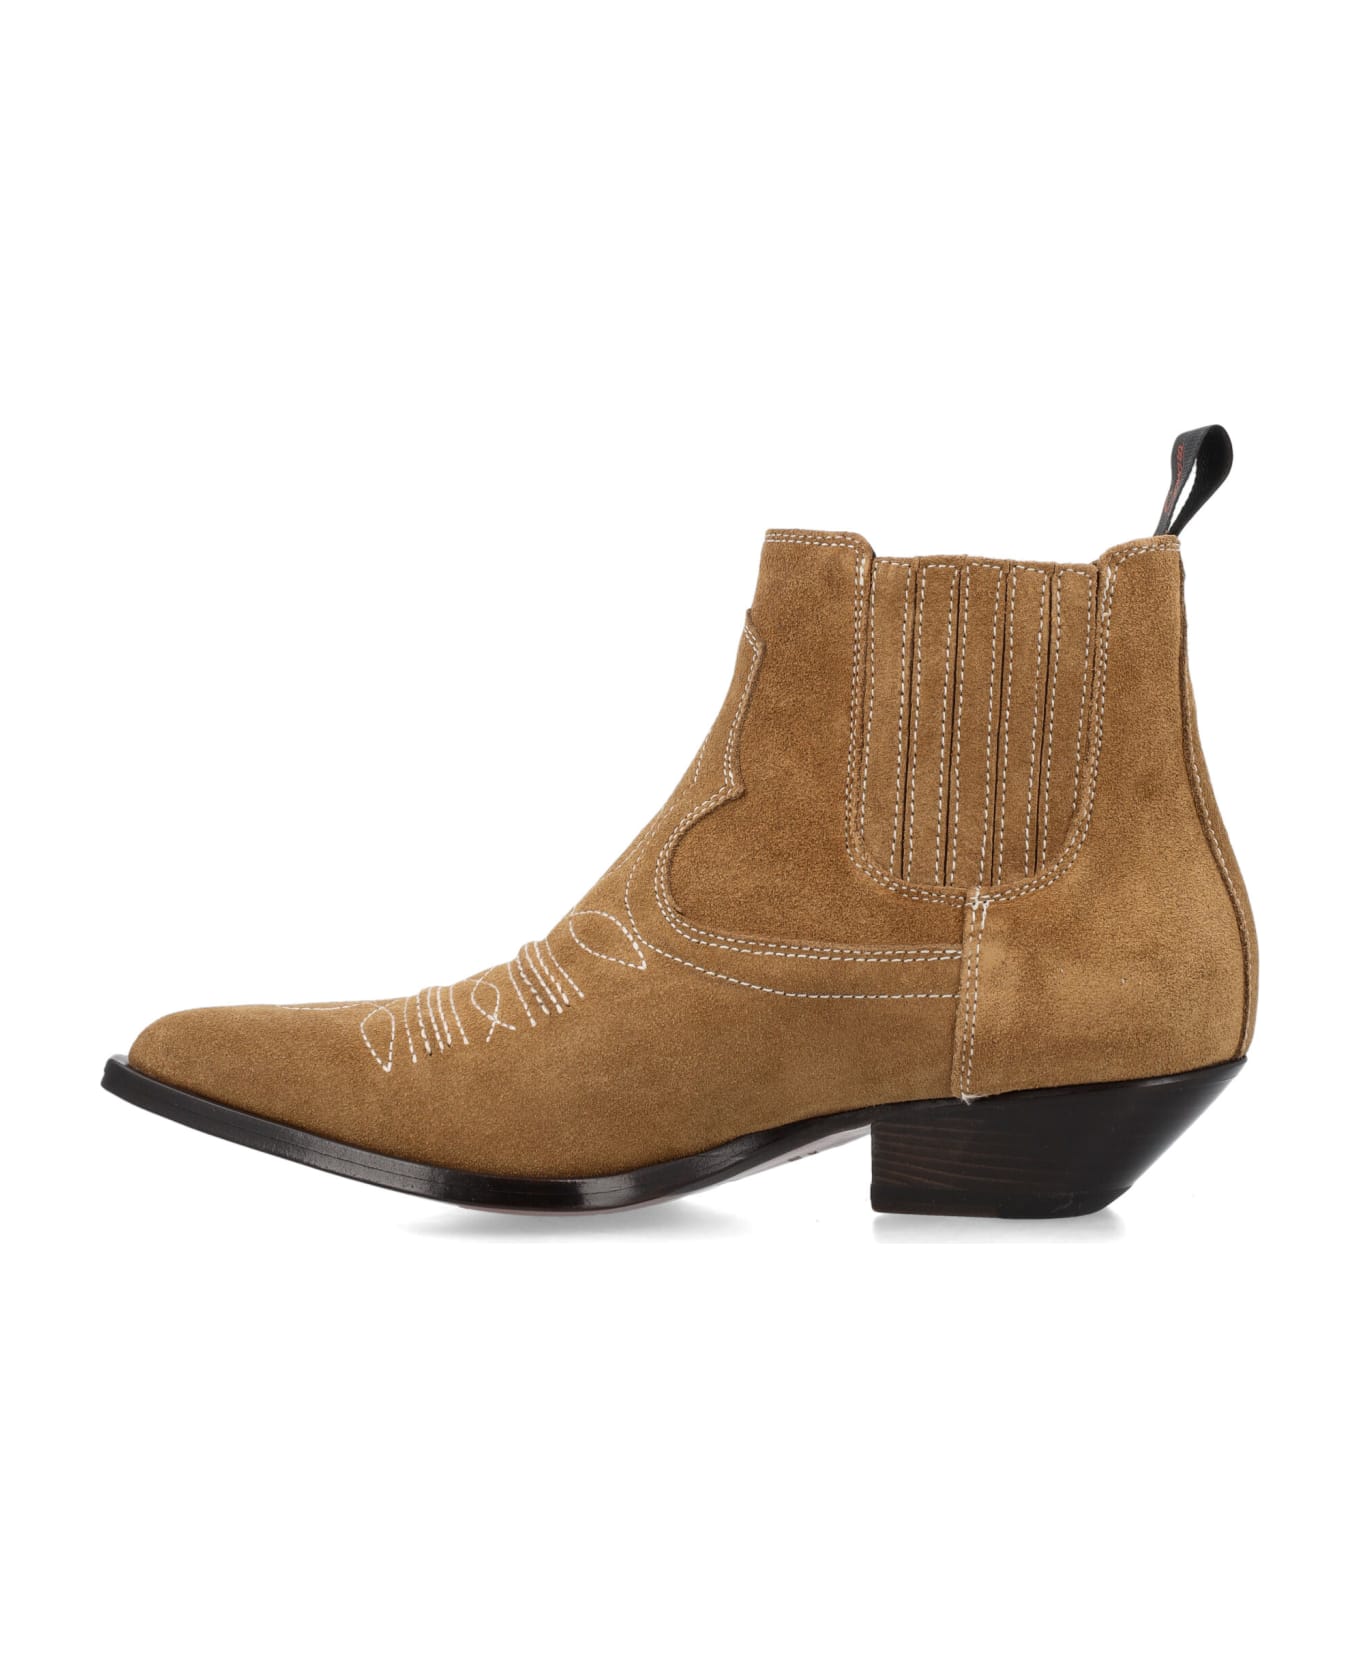 Sonora Idalgo Flower Ankle Boots - CIGAR ブーツ